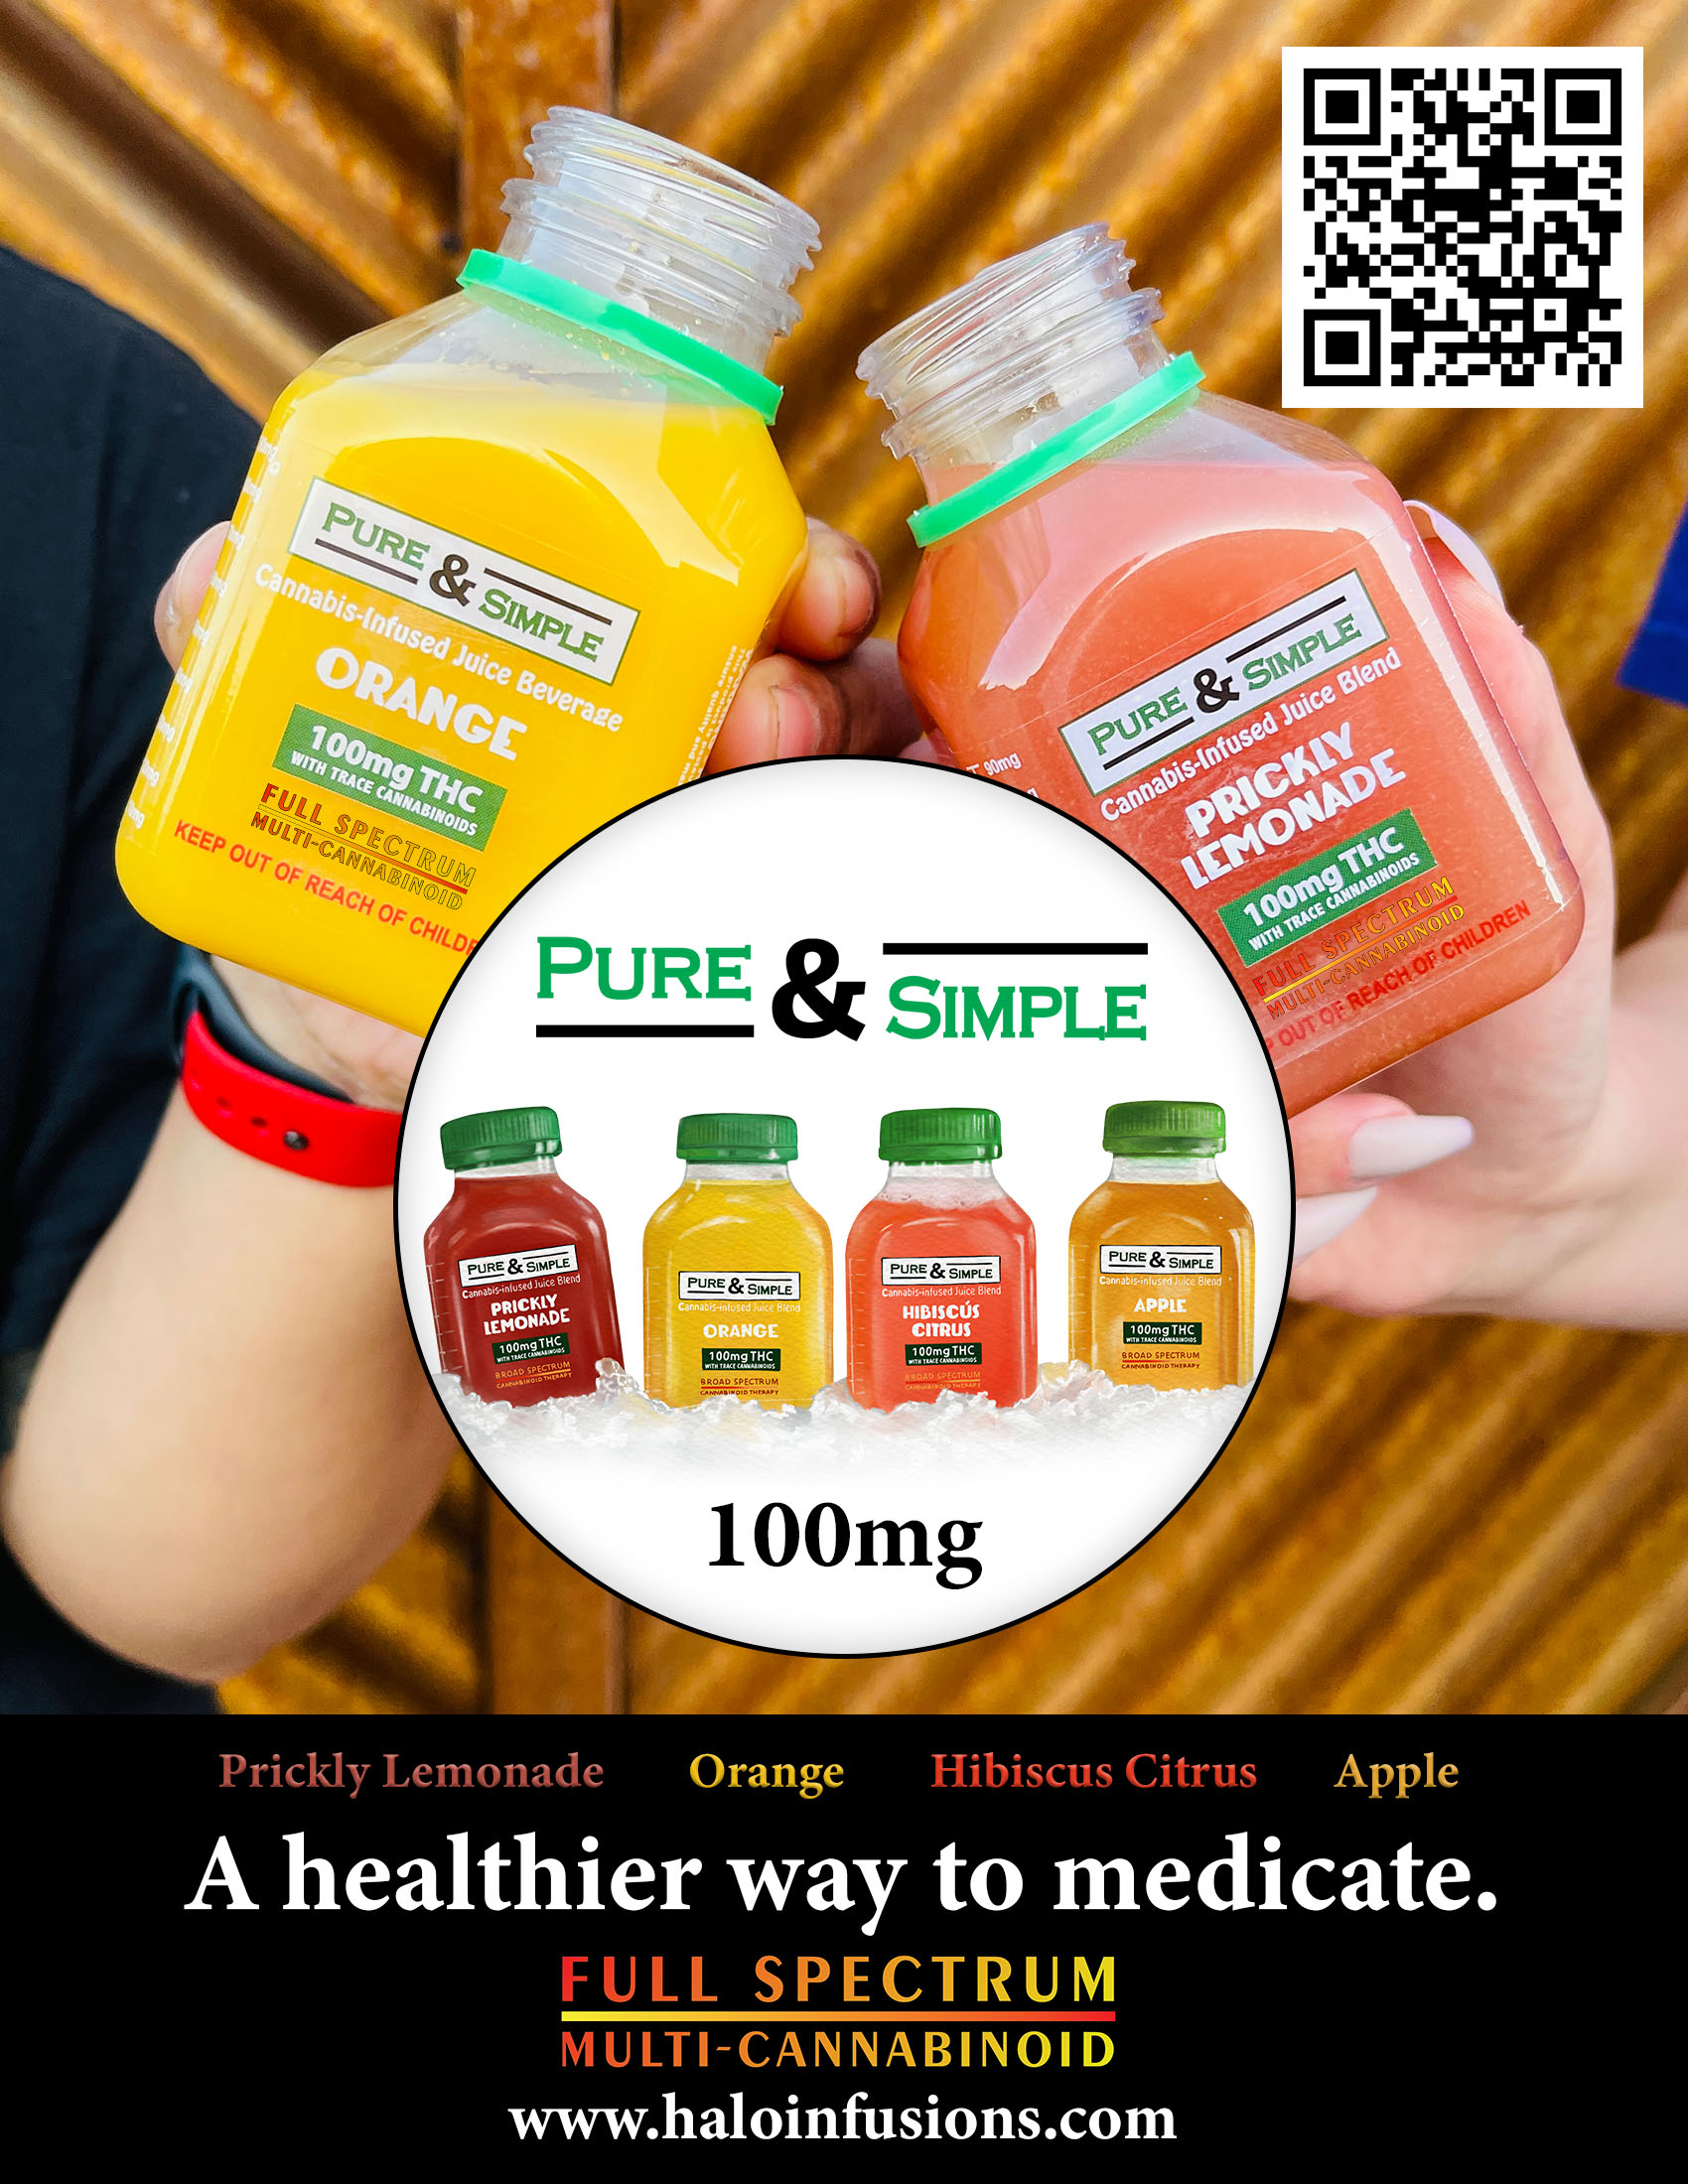 Pure & Simple tabletop flyer for onsites, prickly lemonade, orange, hibiscus citrus, apple, a healthier way to medicate, Halo Infusions